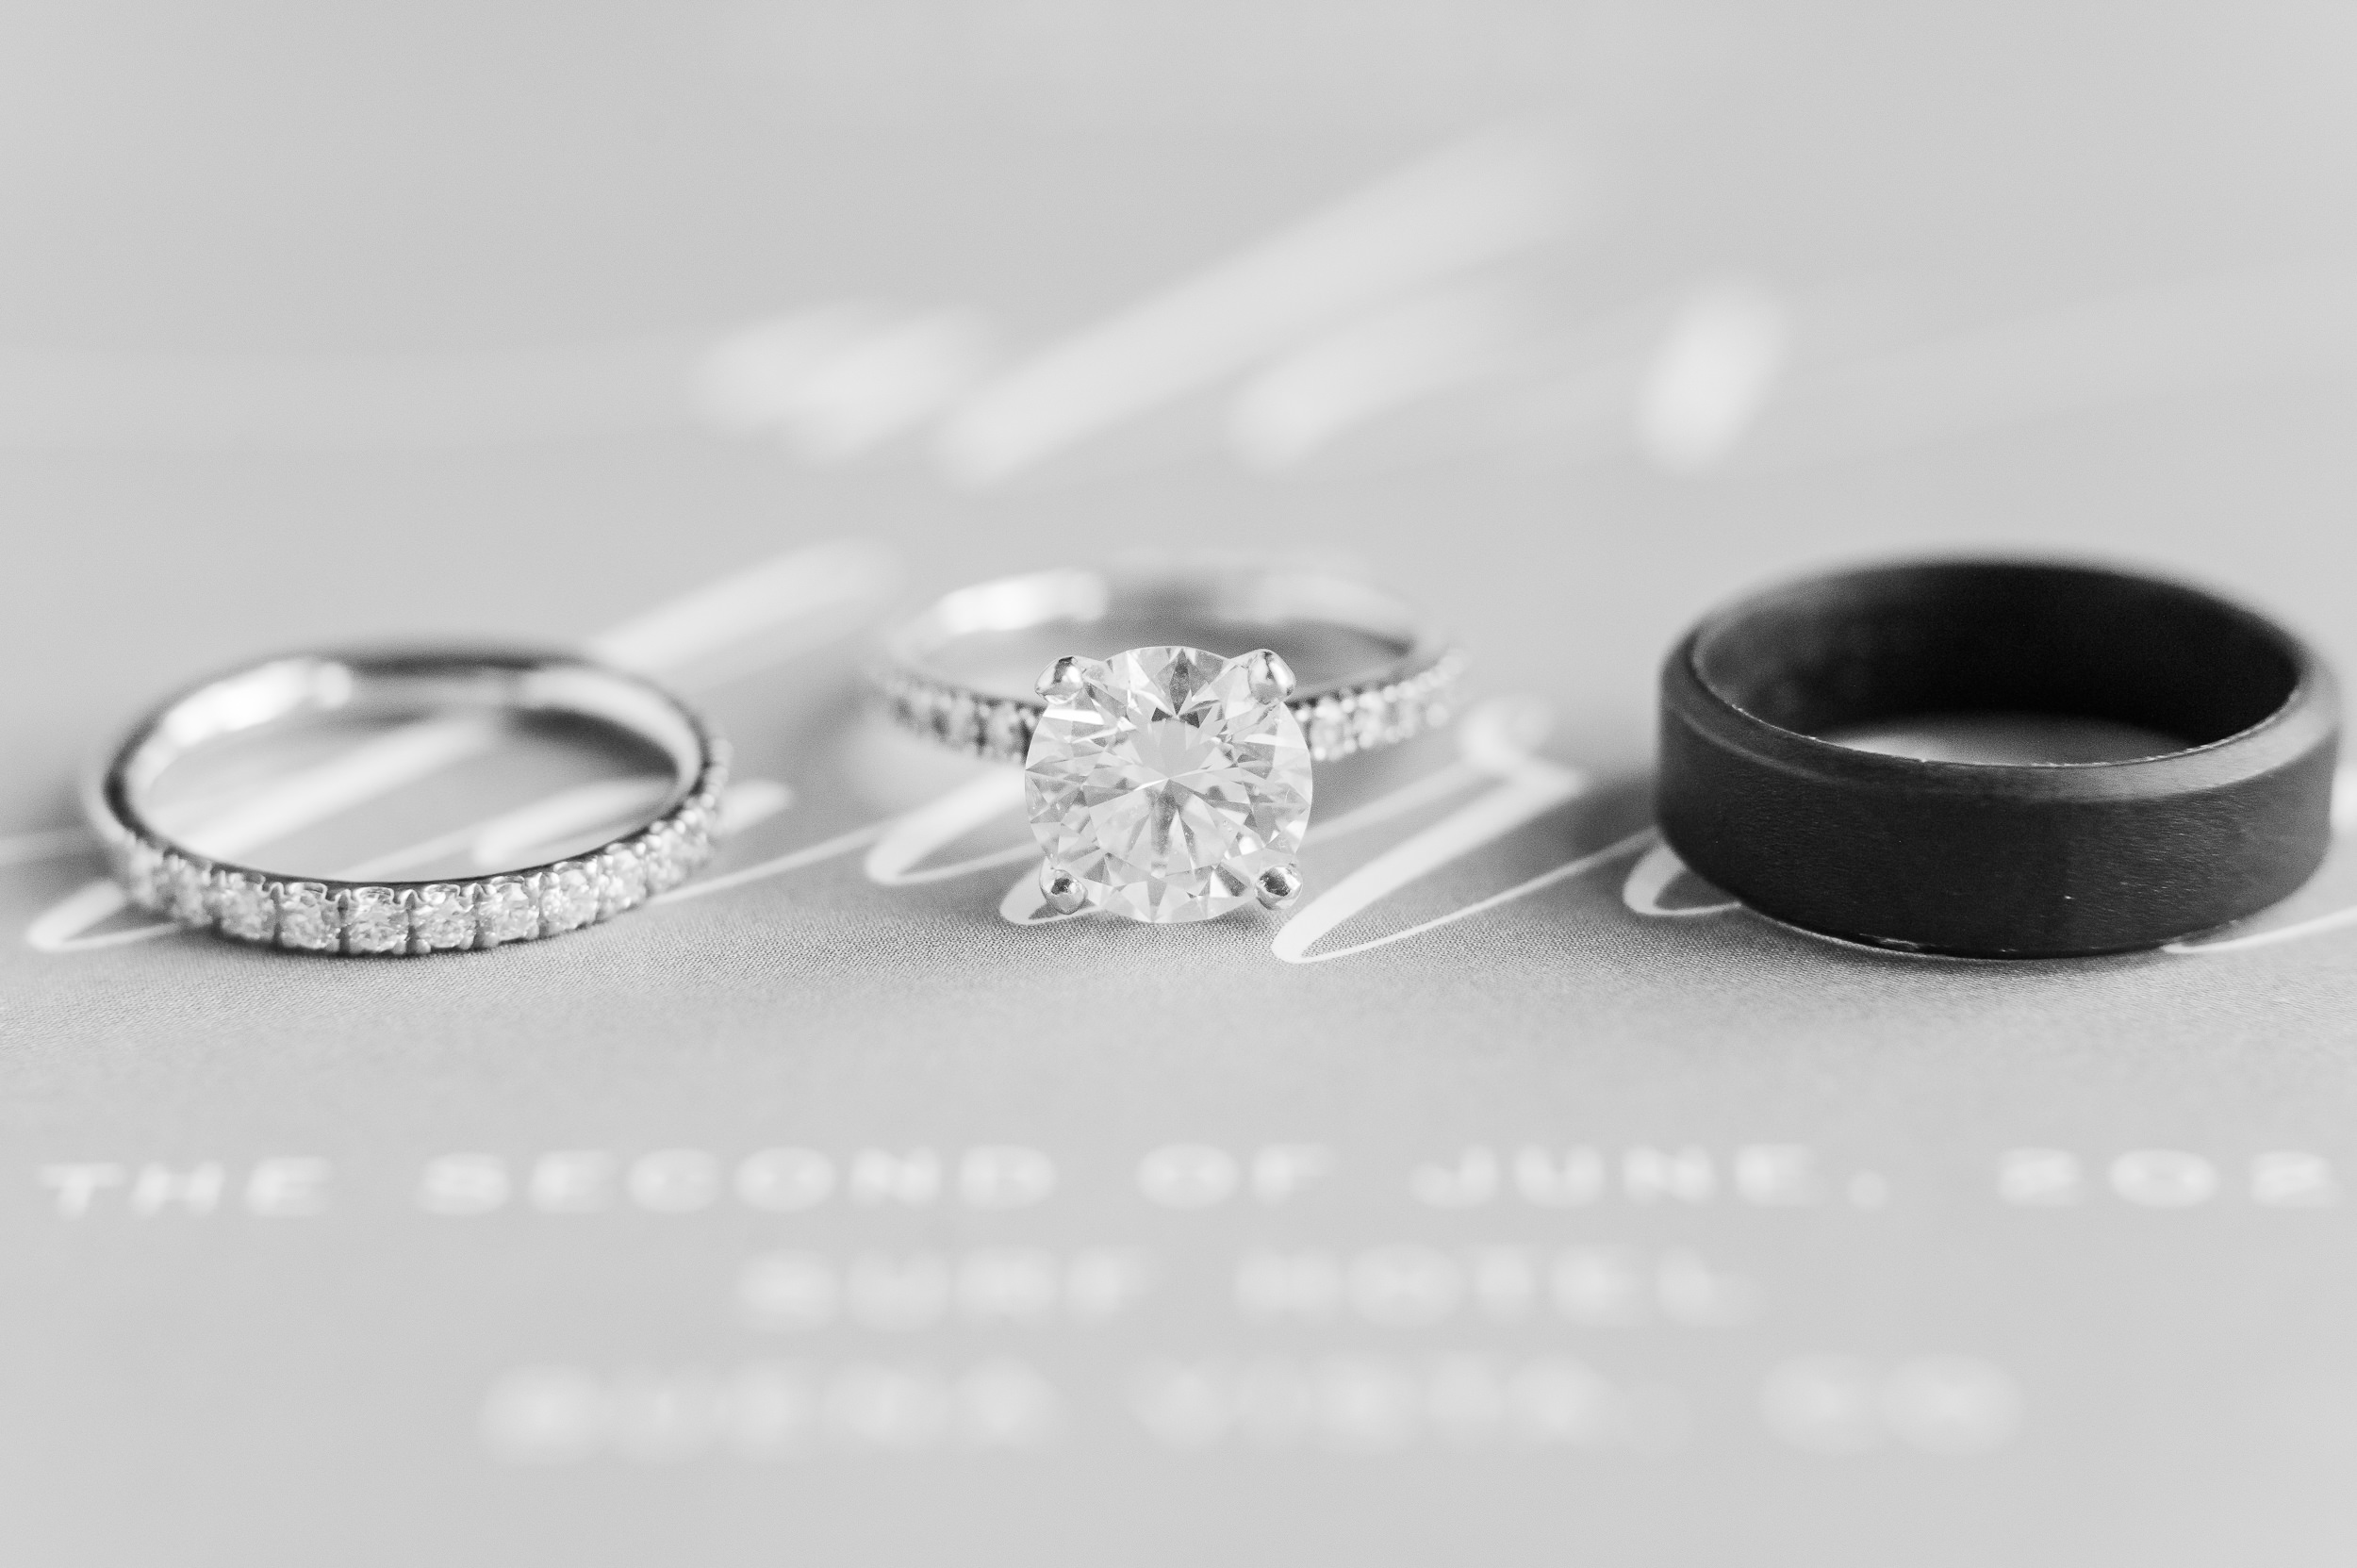 Close up photograph of a bride and groom's wedding rings laying on their invitation.